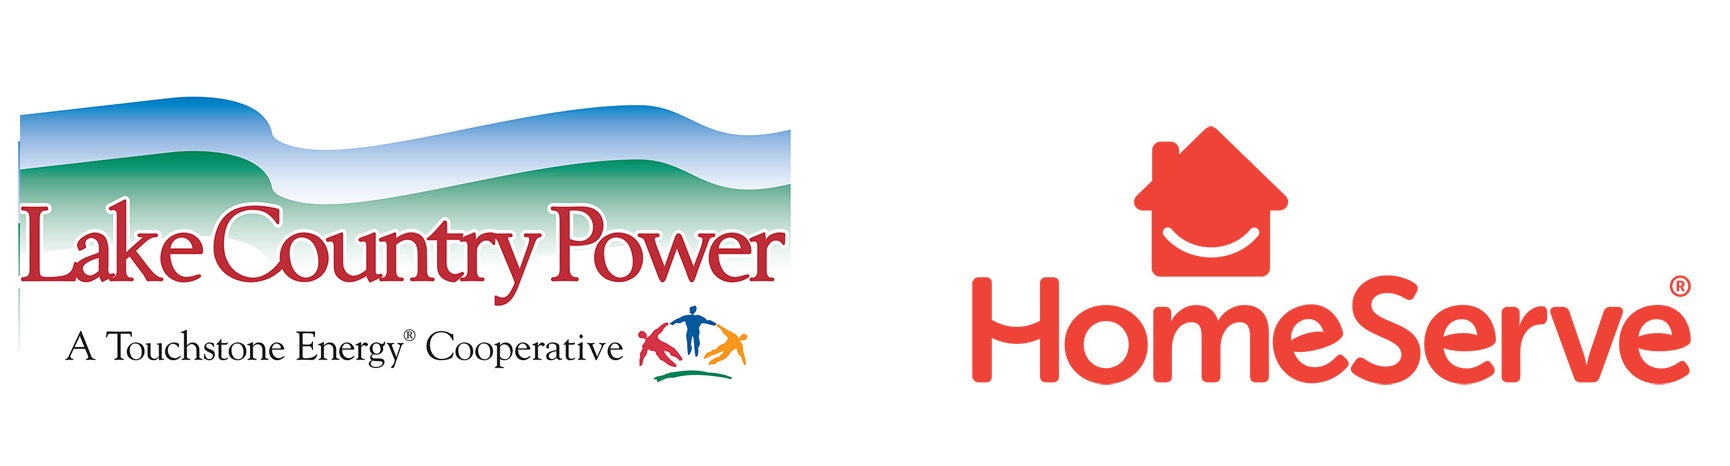 Lake Country Power and HomeServe logos